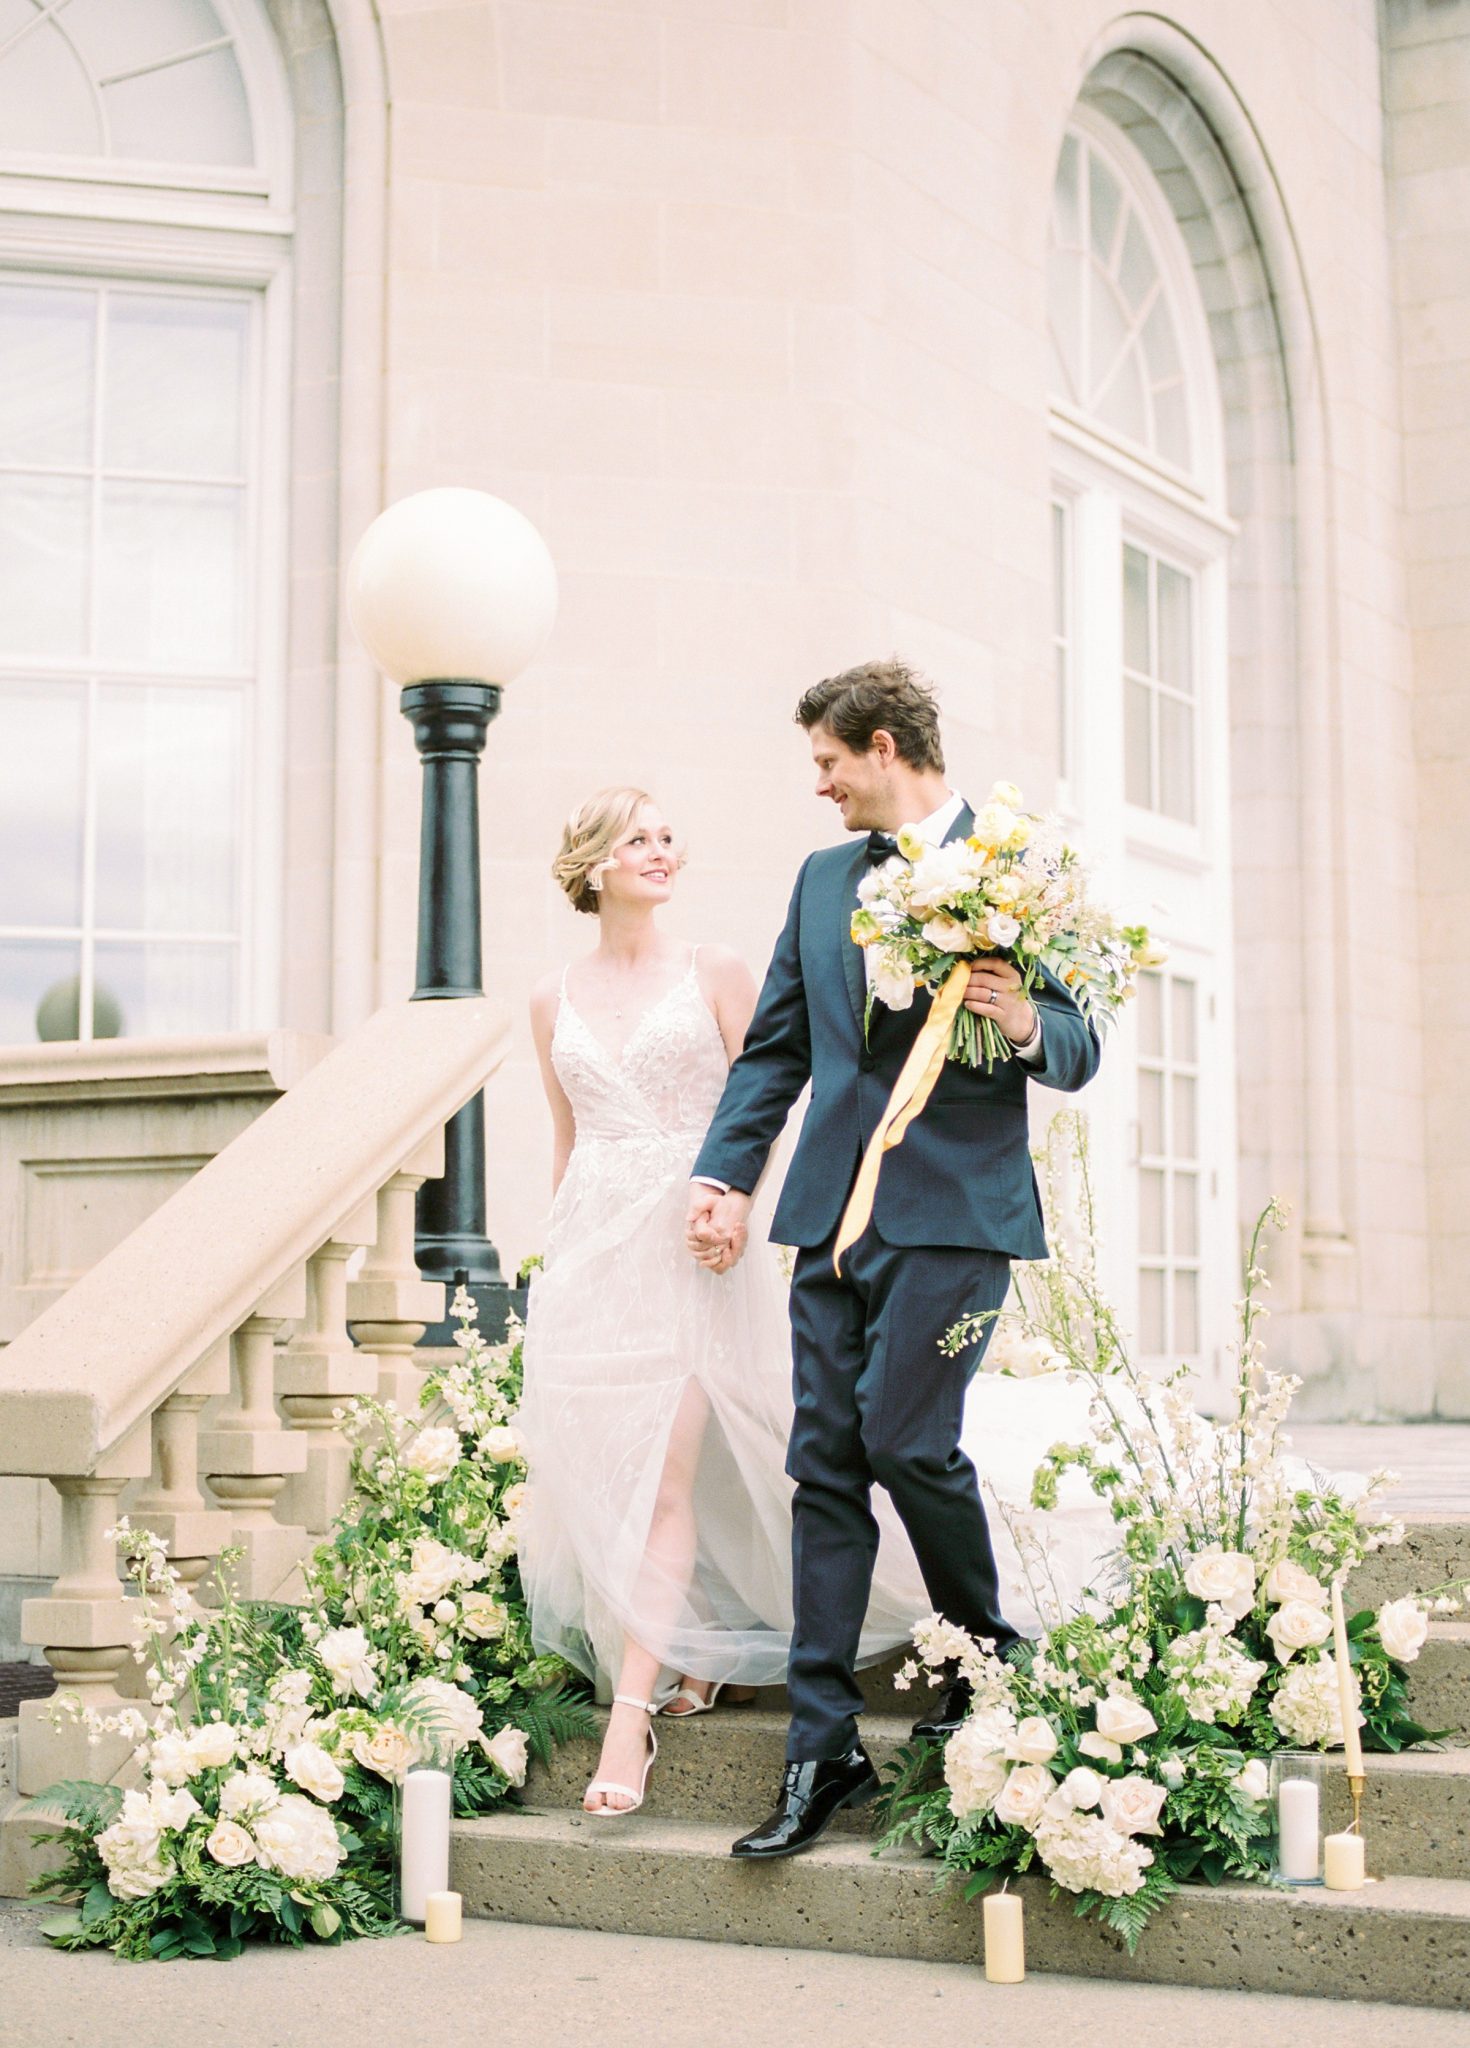 Romantic and Whimsical Yellow Wedding Inspiration at The Fairmont Hotel in Edmonton - featured on the Bronte Bride Blog